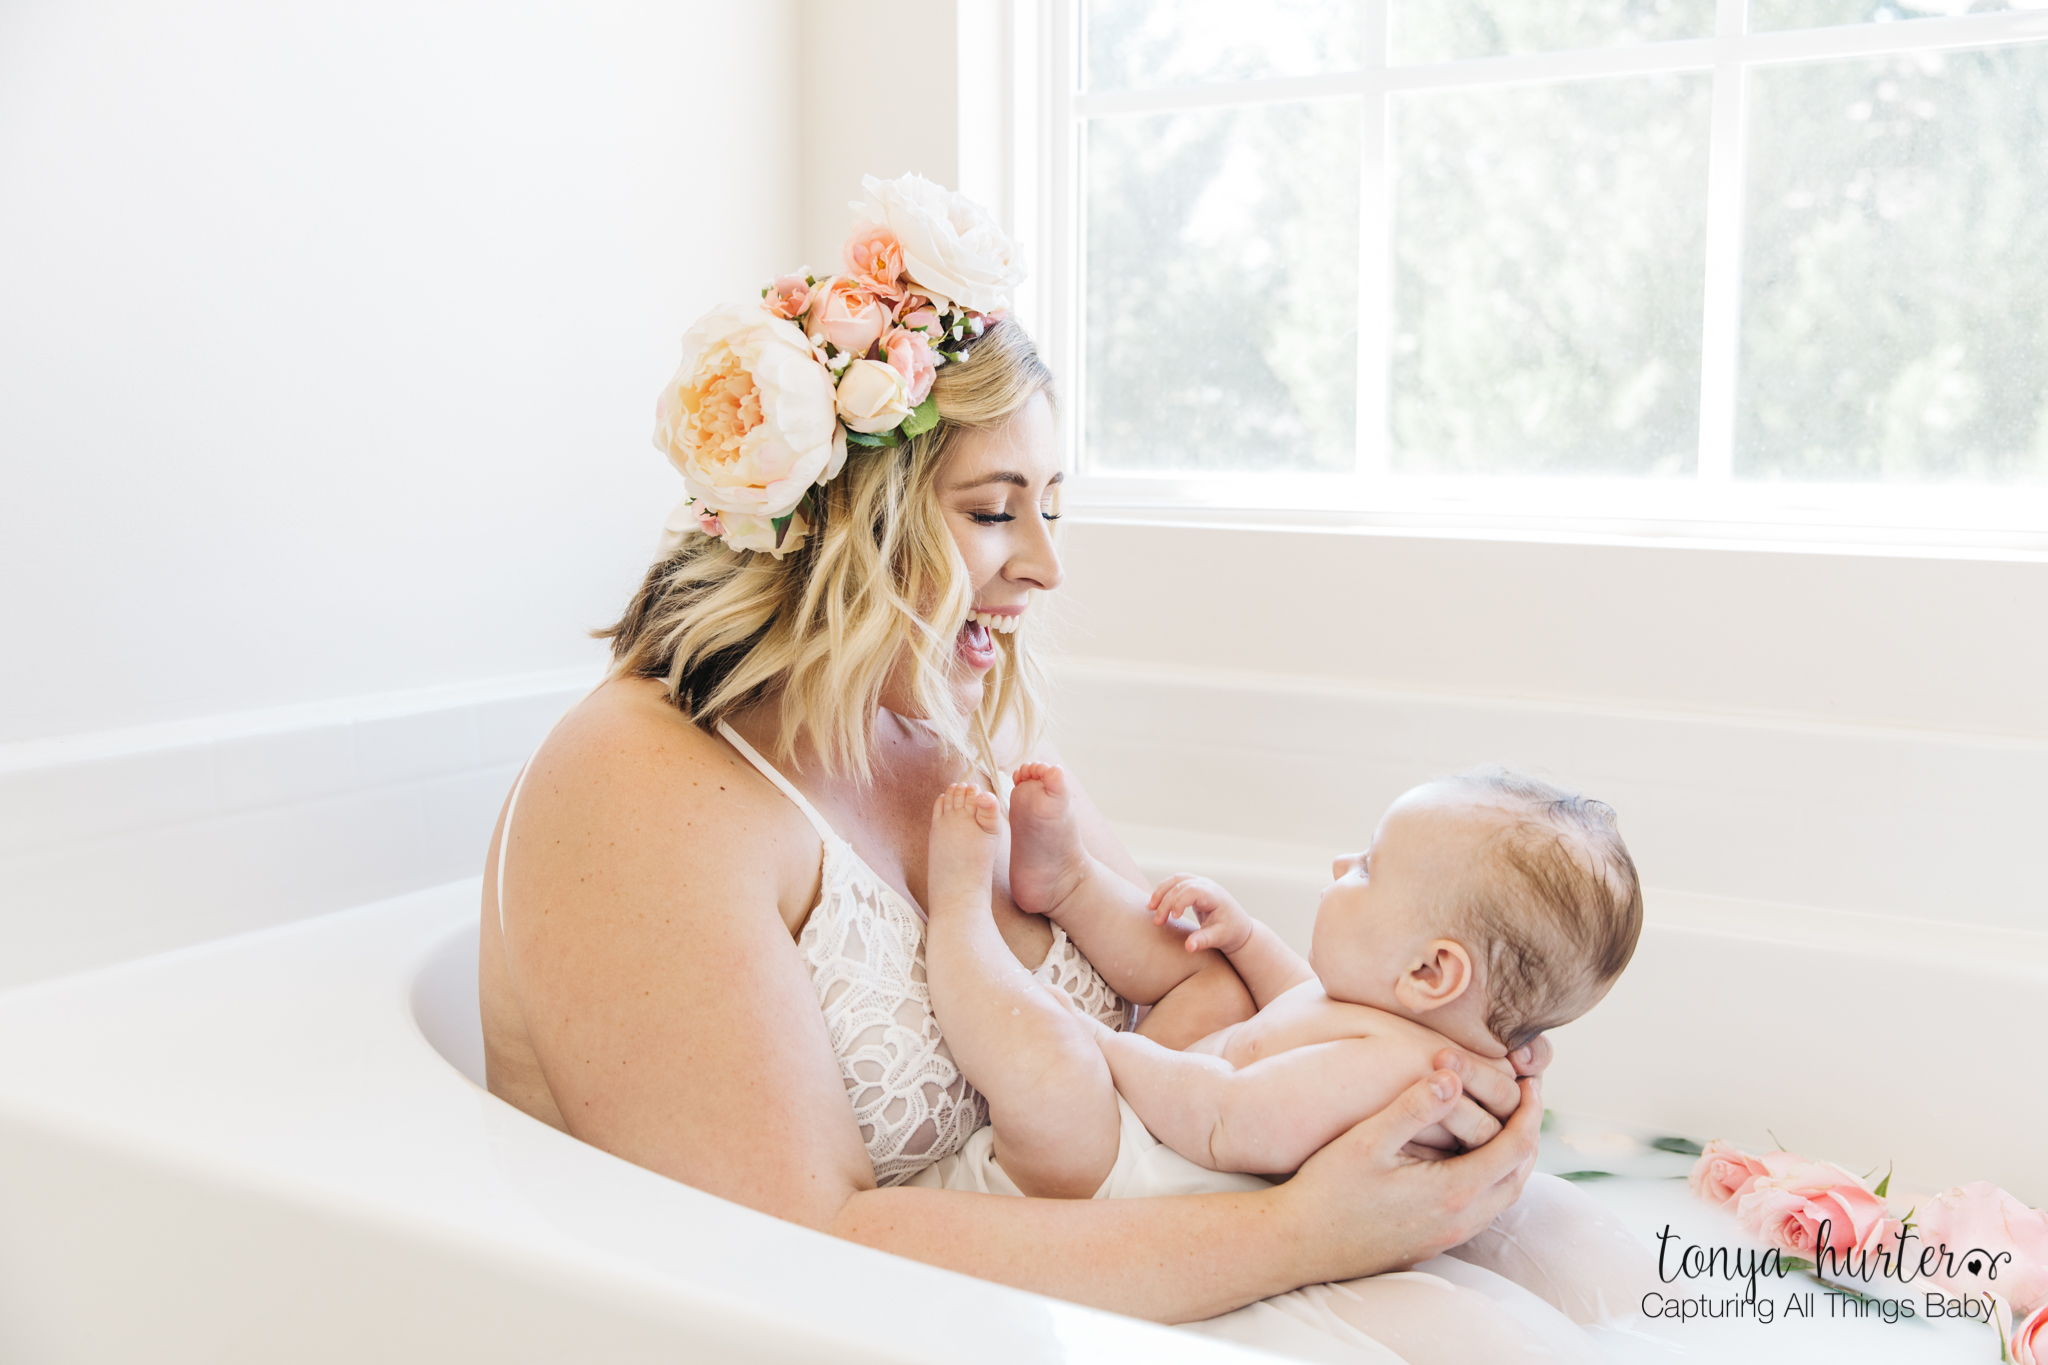 Mother and baby milk bath photo shoot